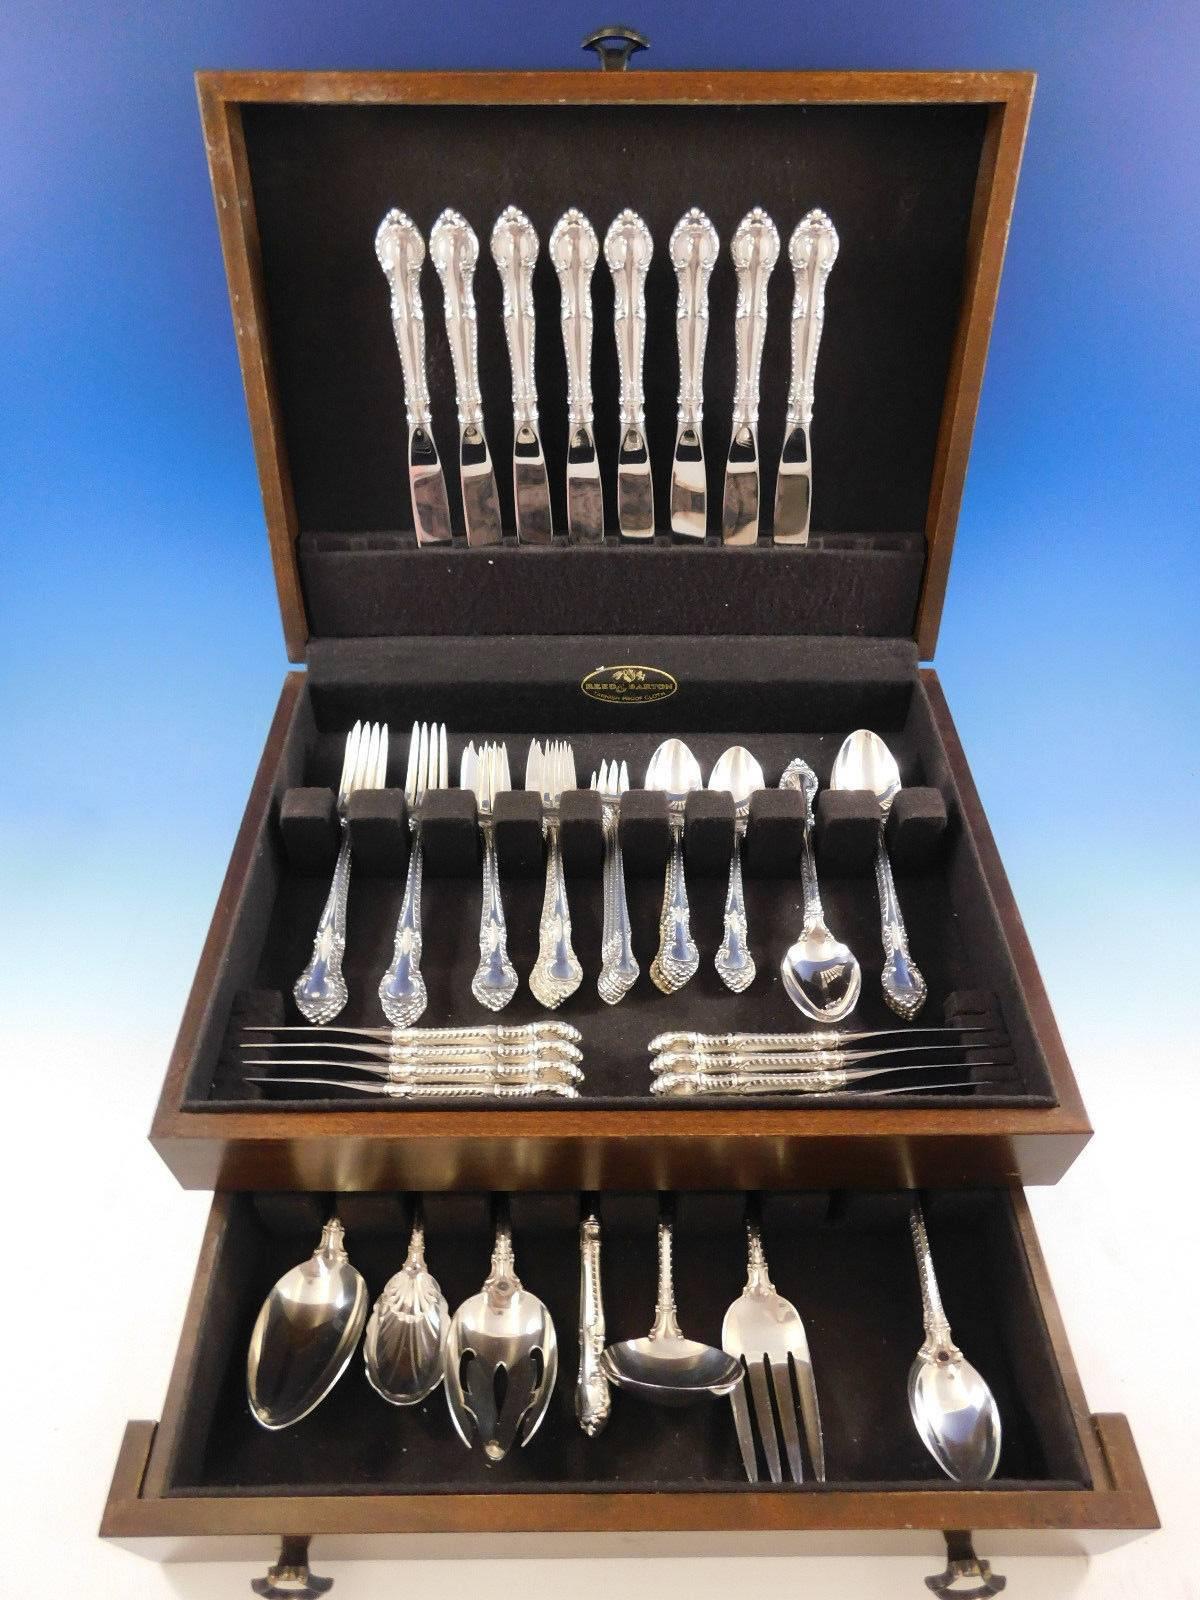 English gadroon by Gorham sterling silver flatware set, 70 pieces. This set includes: 

eight knives, 8 3/4